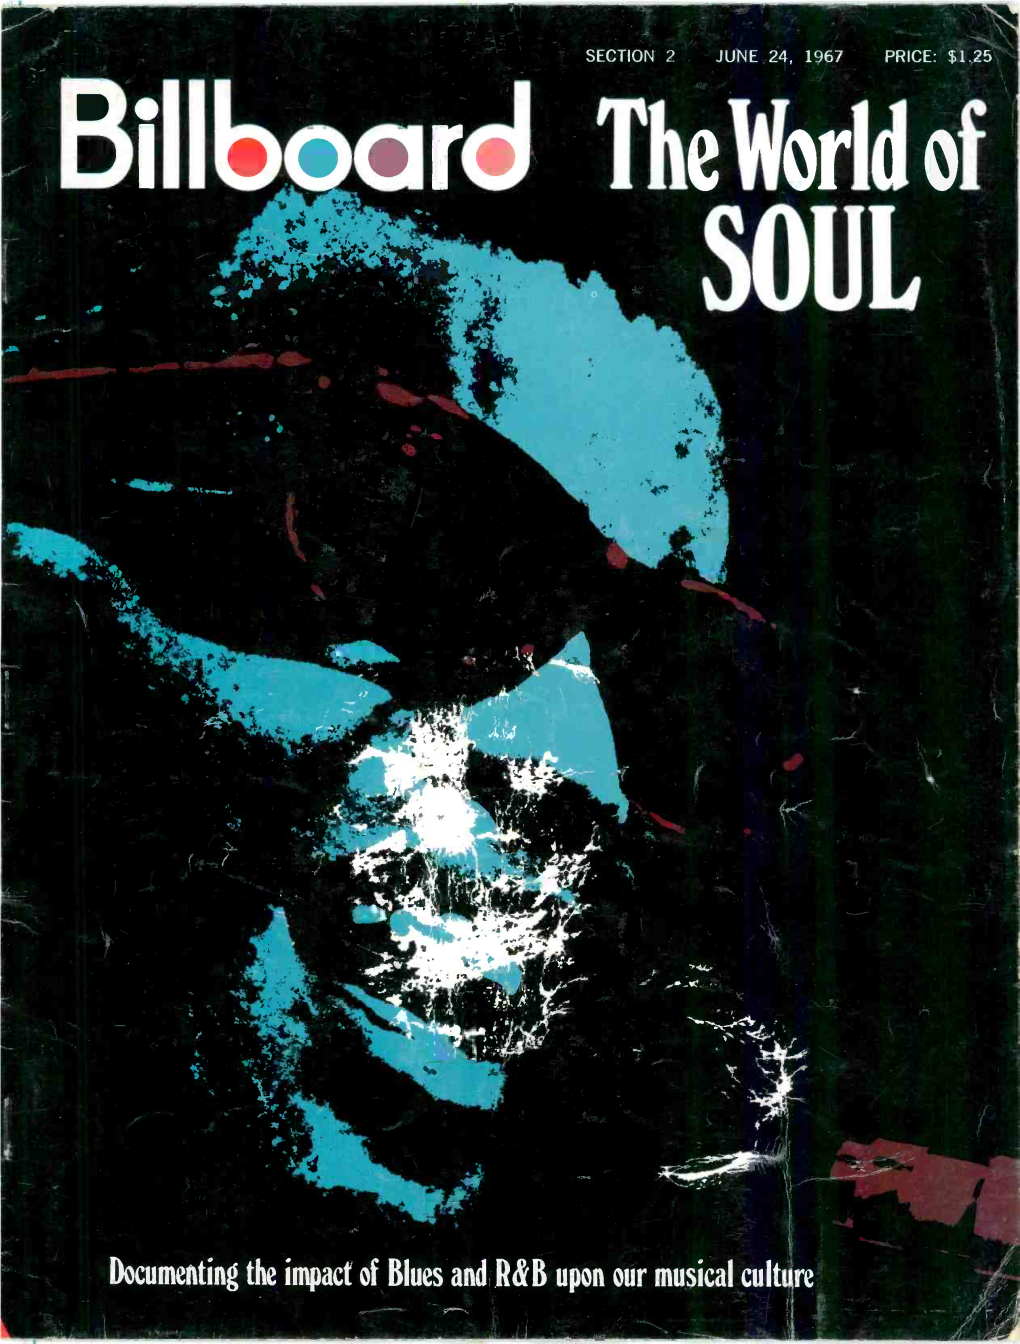 The World of SOUL PRICE: $1 25